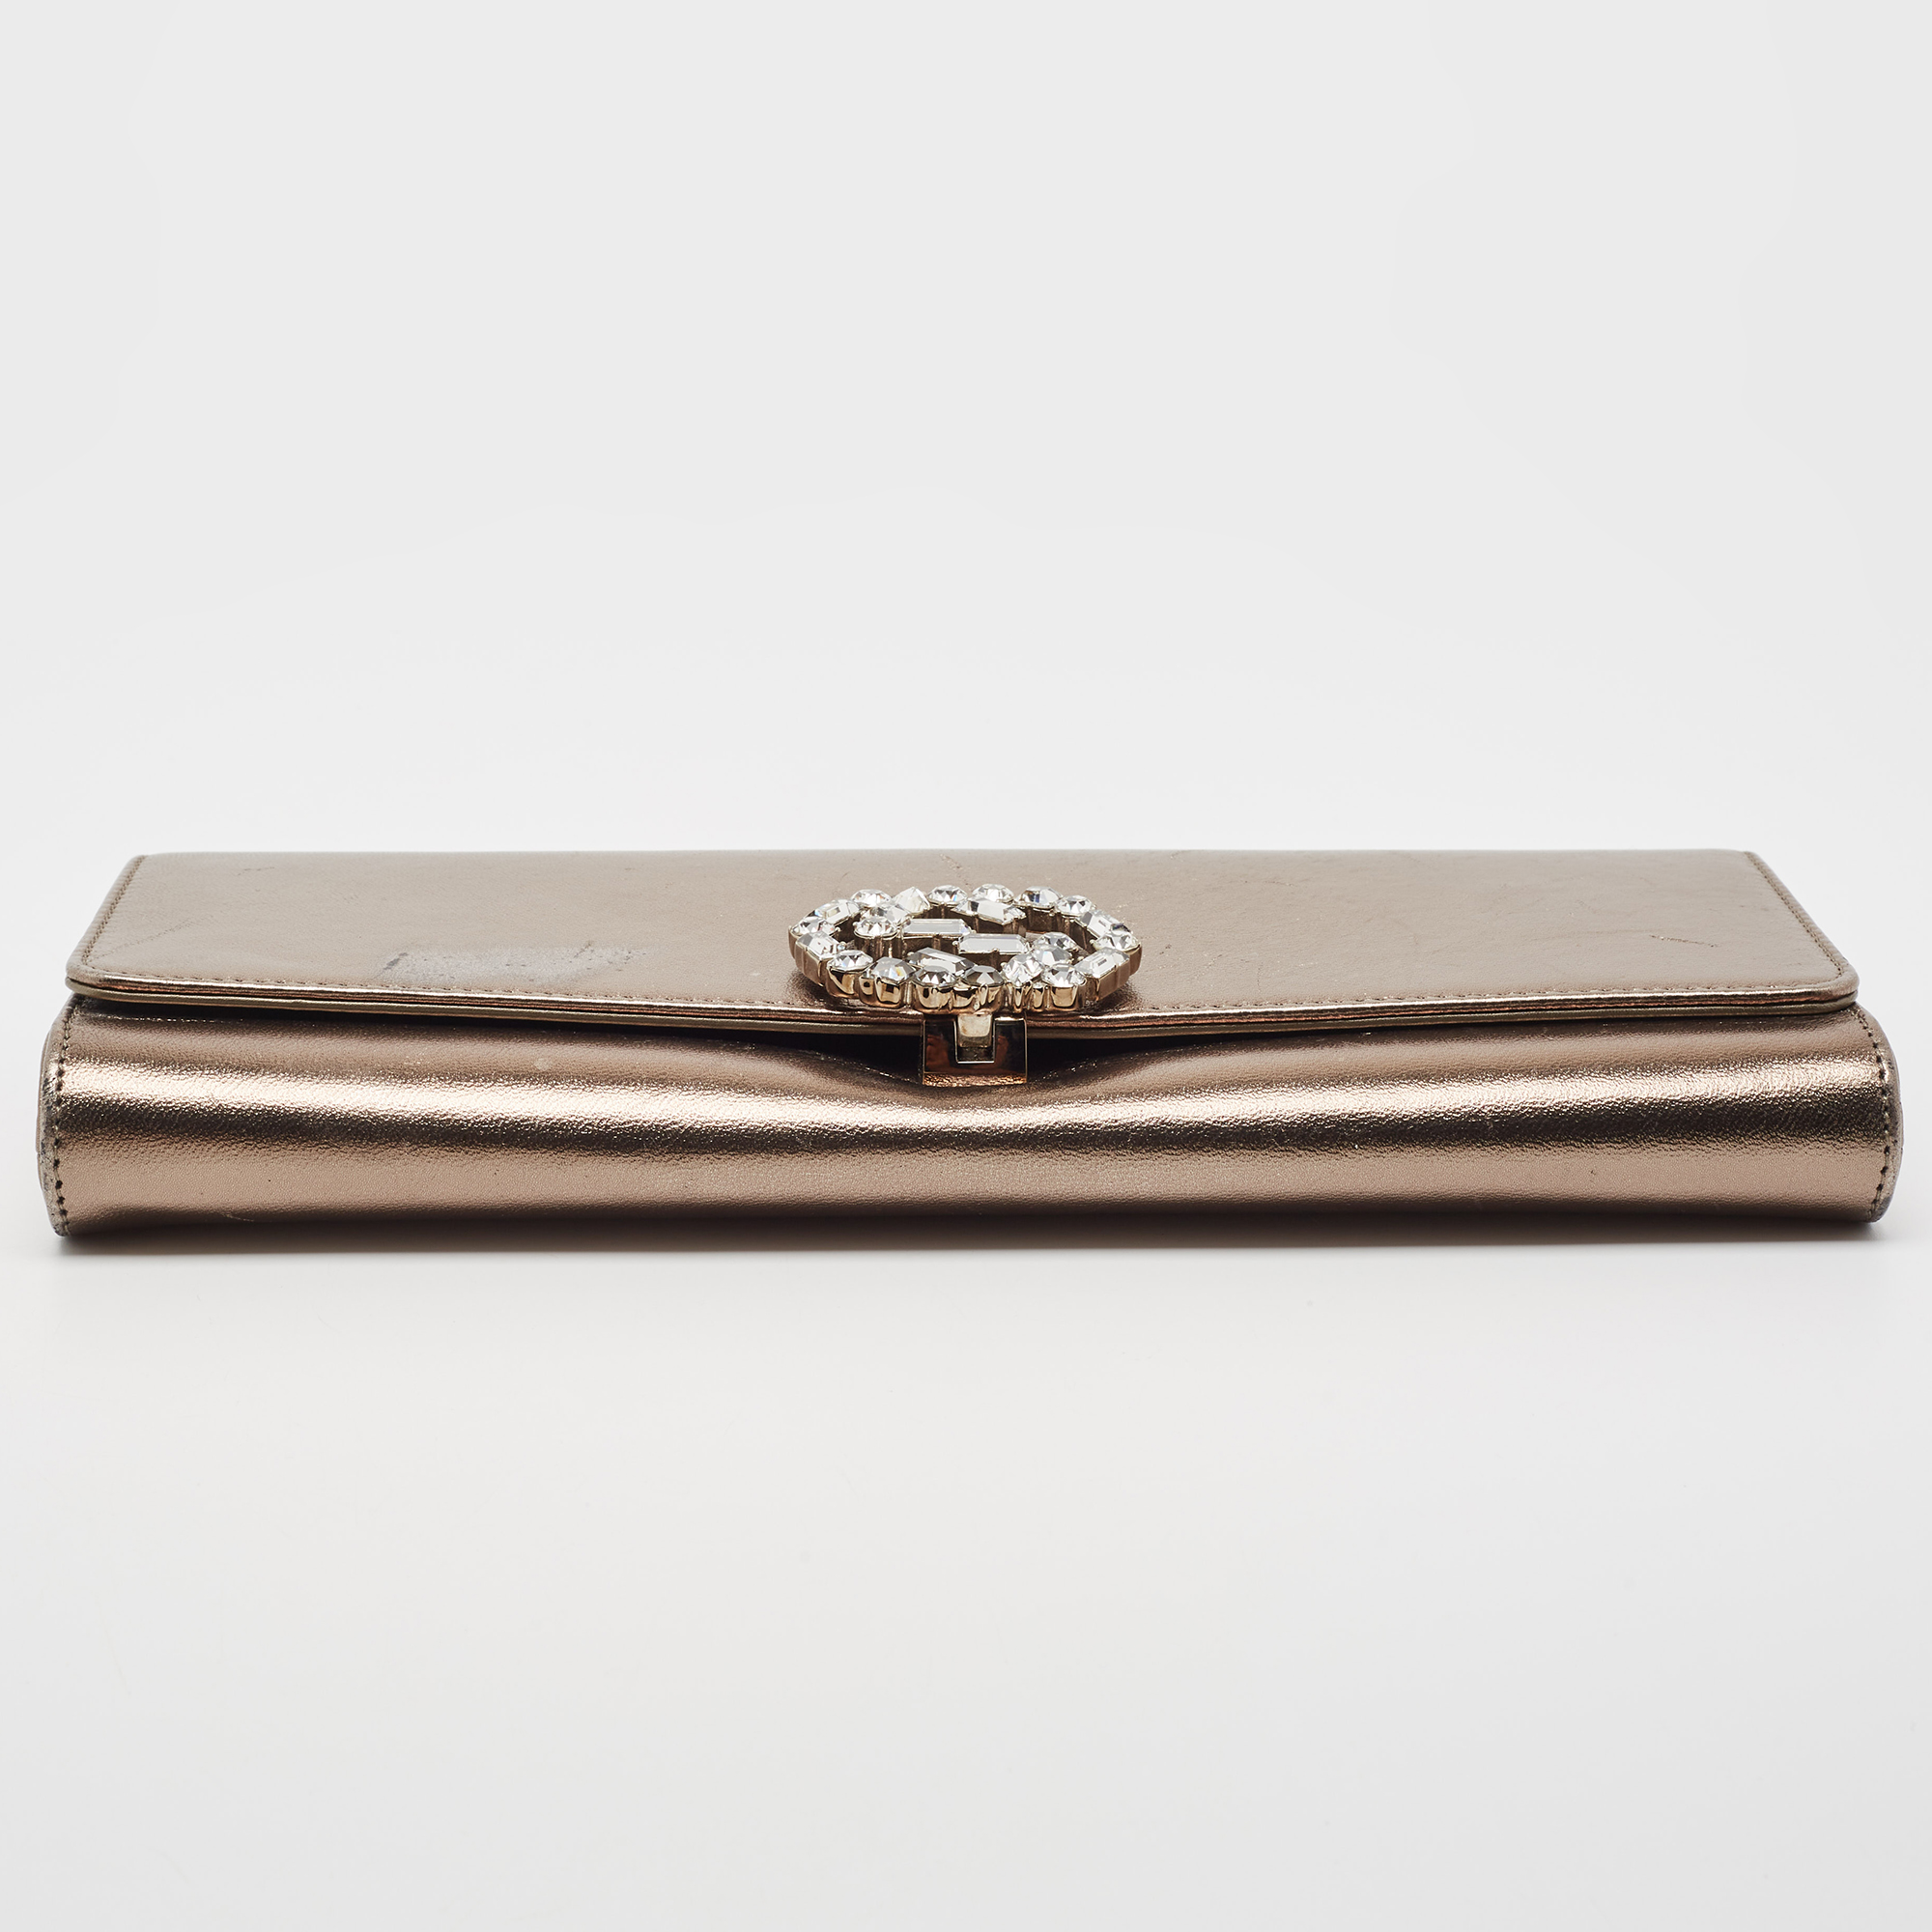 Gucci Metallic Leather GG Crystals Broadway Clutch